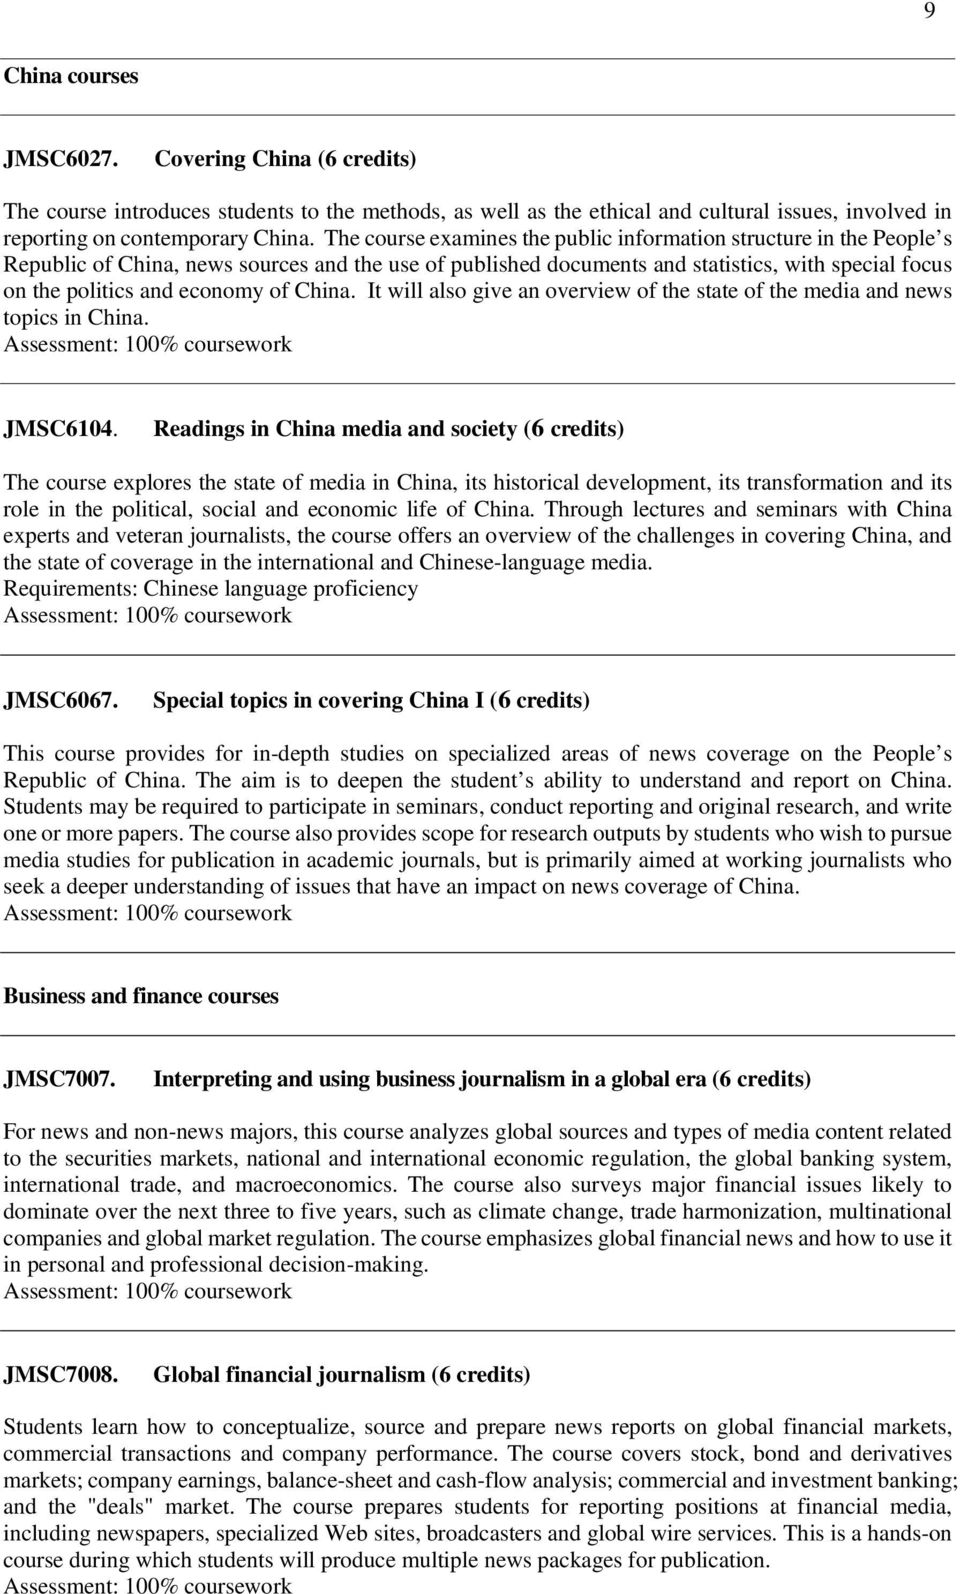 of China. It will also give an overview of the state of the media and news topics in China. JMSC6104.